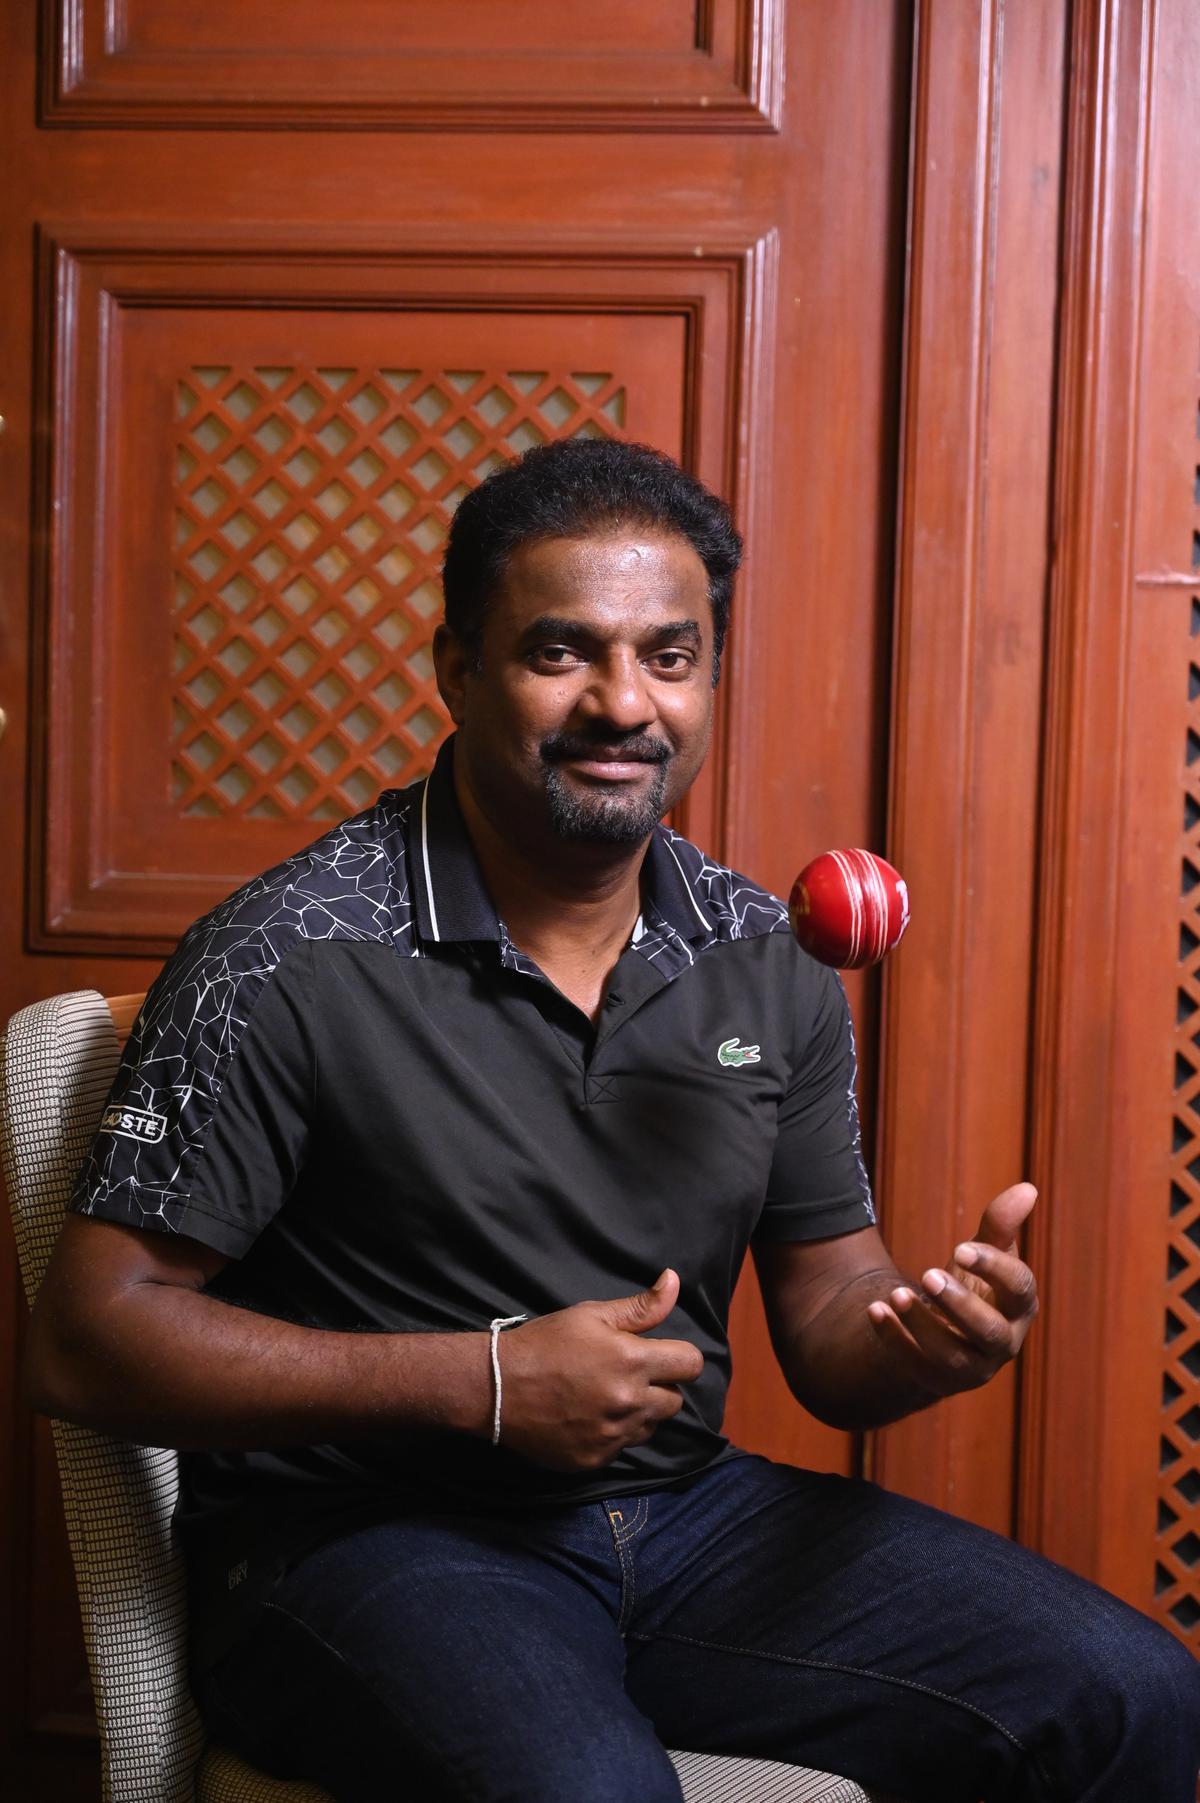 What did Muttiah Muralitharan say to umpire Darrell Hair years after the chucking controversy?